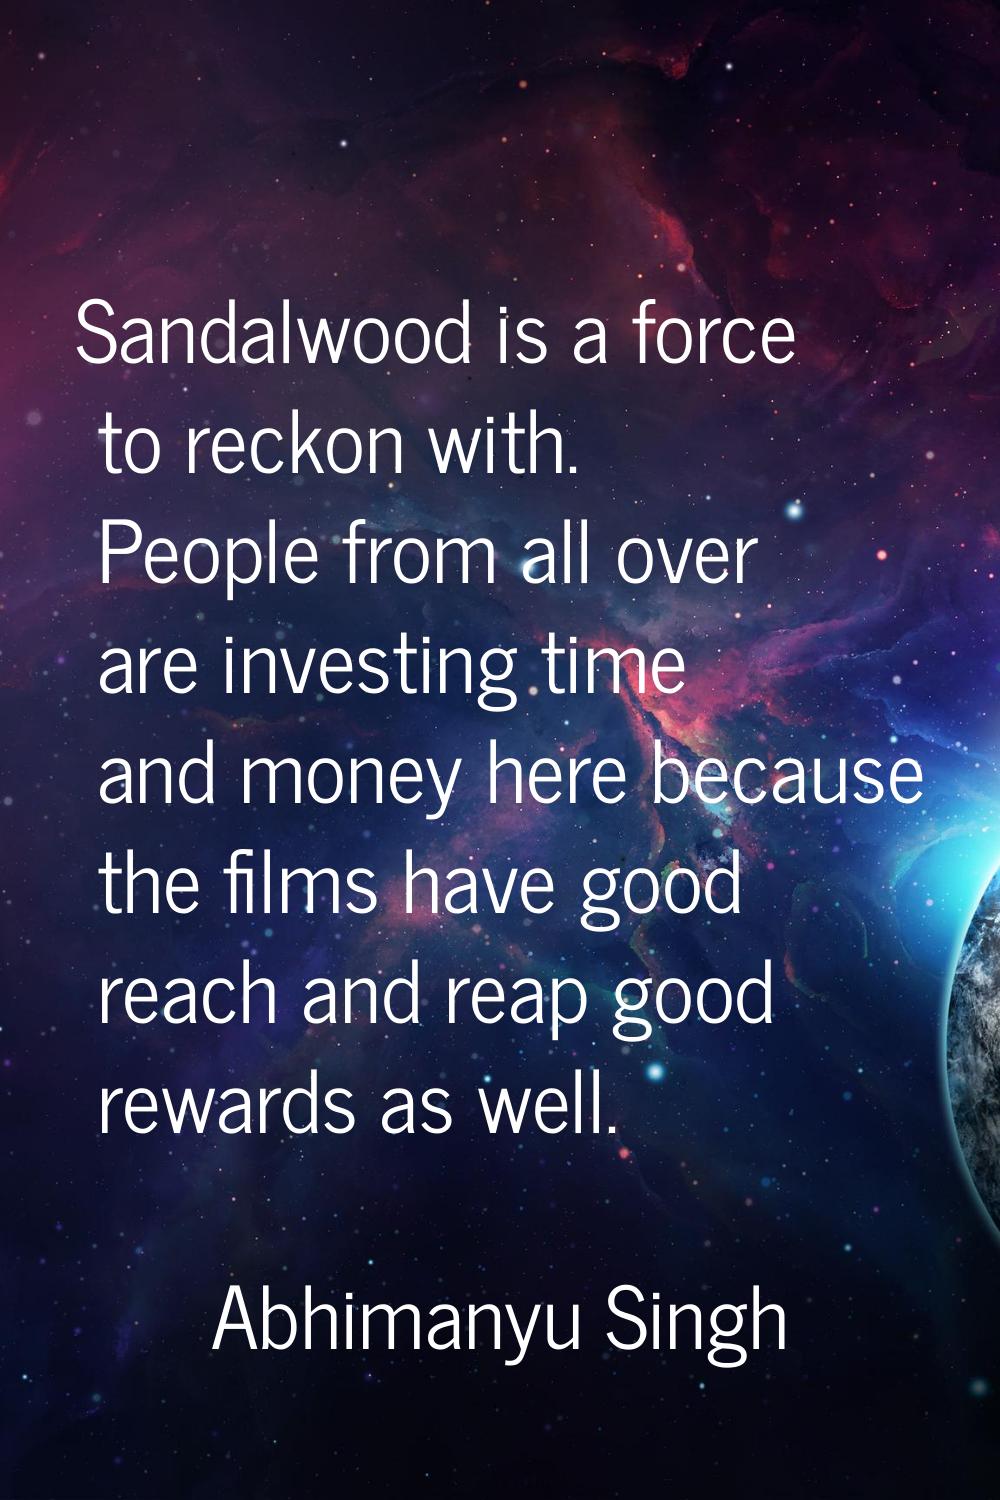 Sandalwood is a force to reckon with. People from all over are investing time and money here becaus